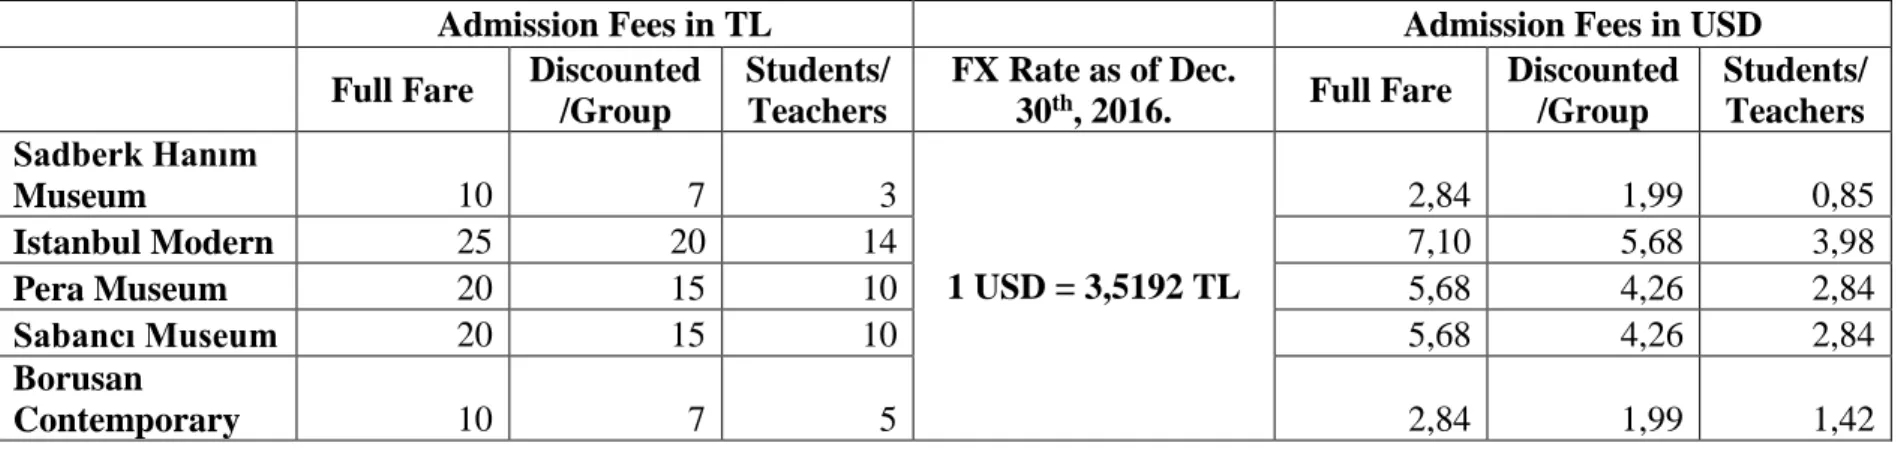 Table 4.2 Admission Fees of the Selected Turkish Private Art Museums 